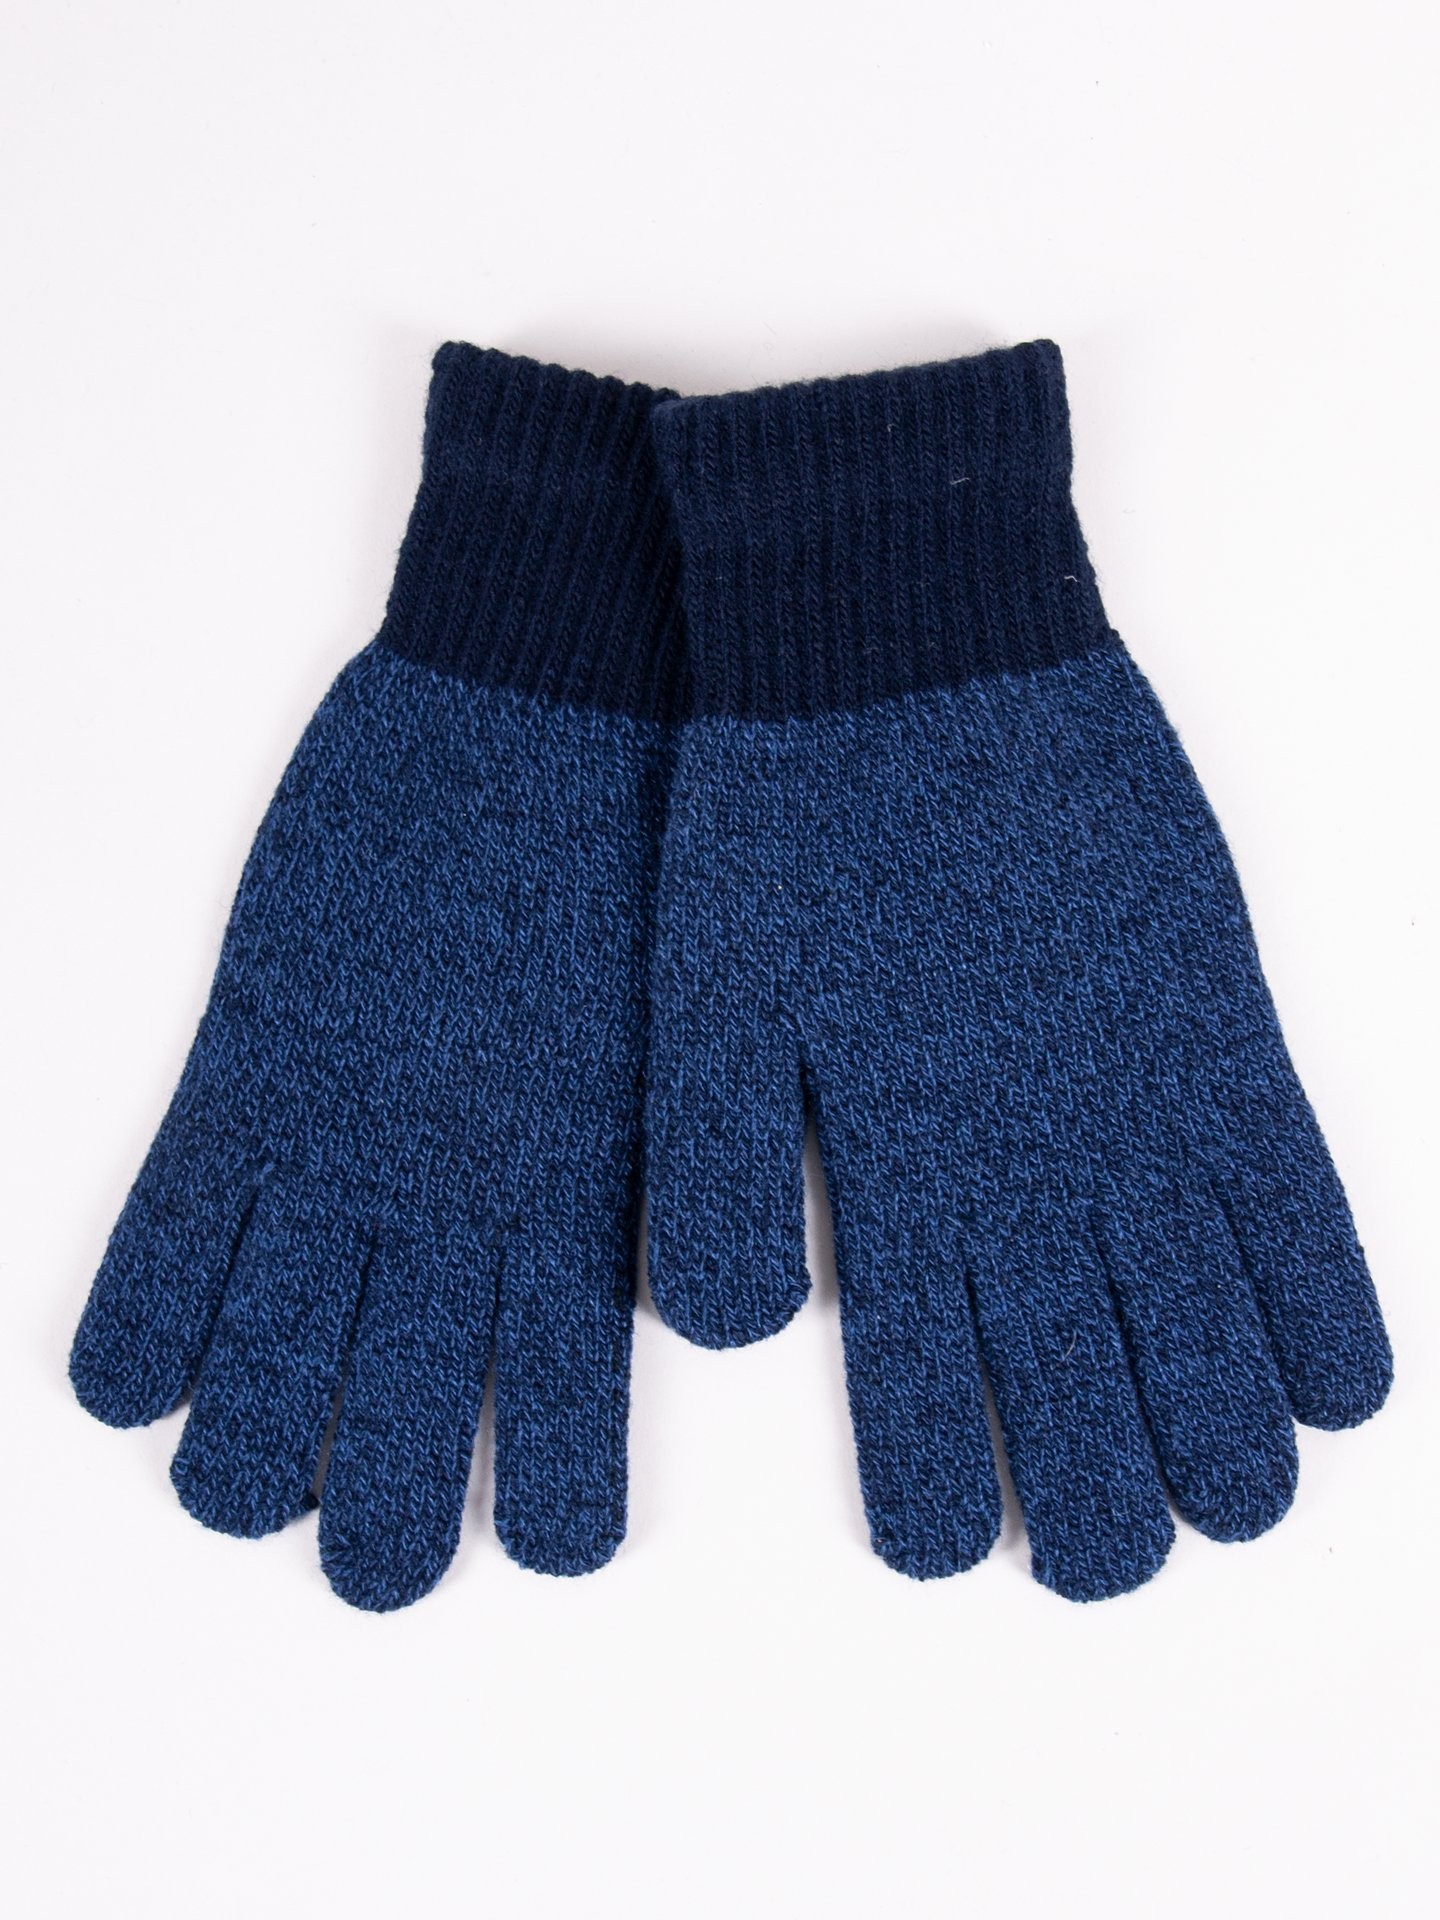 Yoclub Man's Gloves RED-0073F-AA50-001 Navy Blue